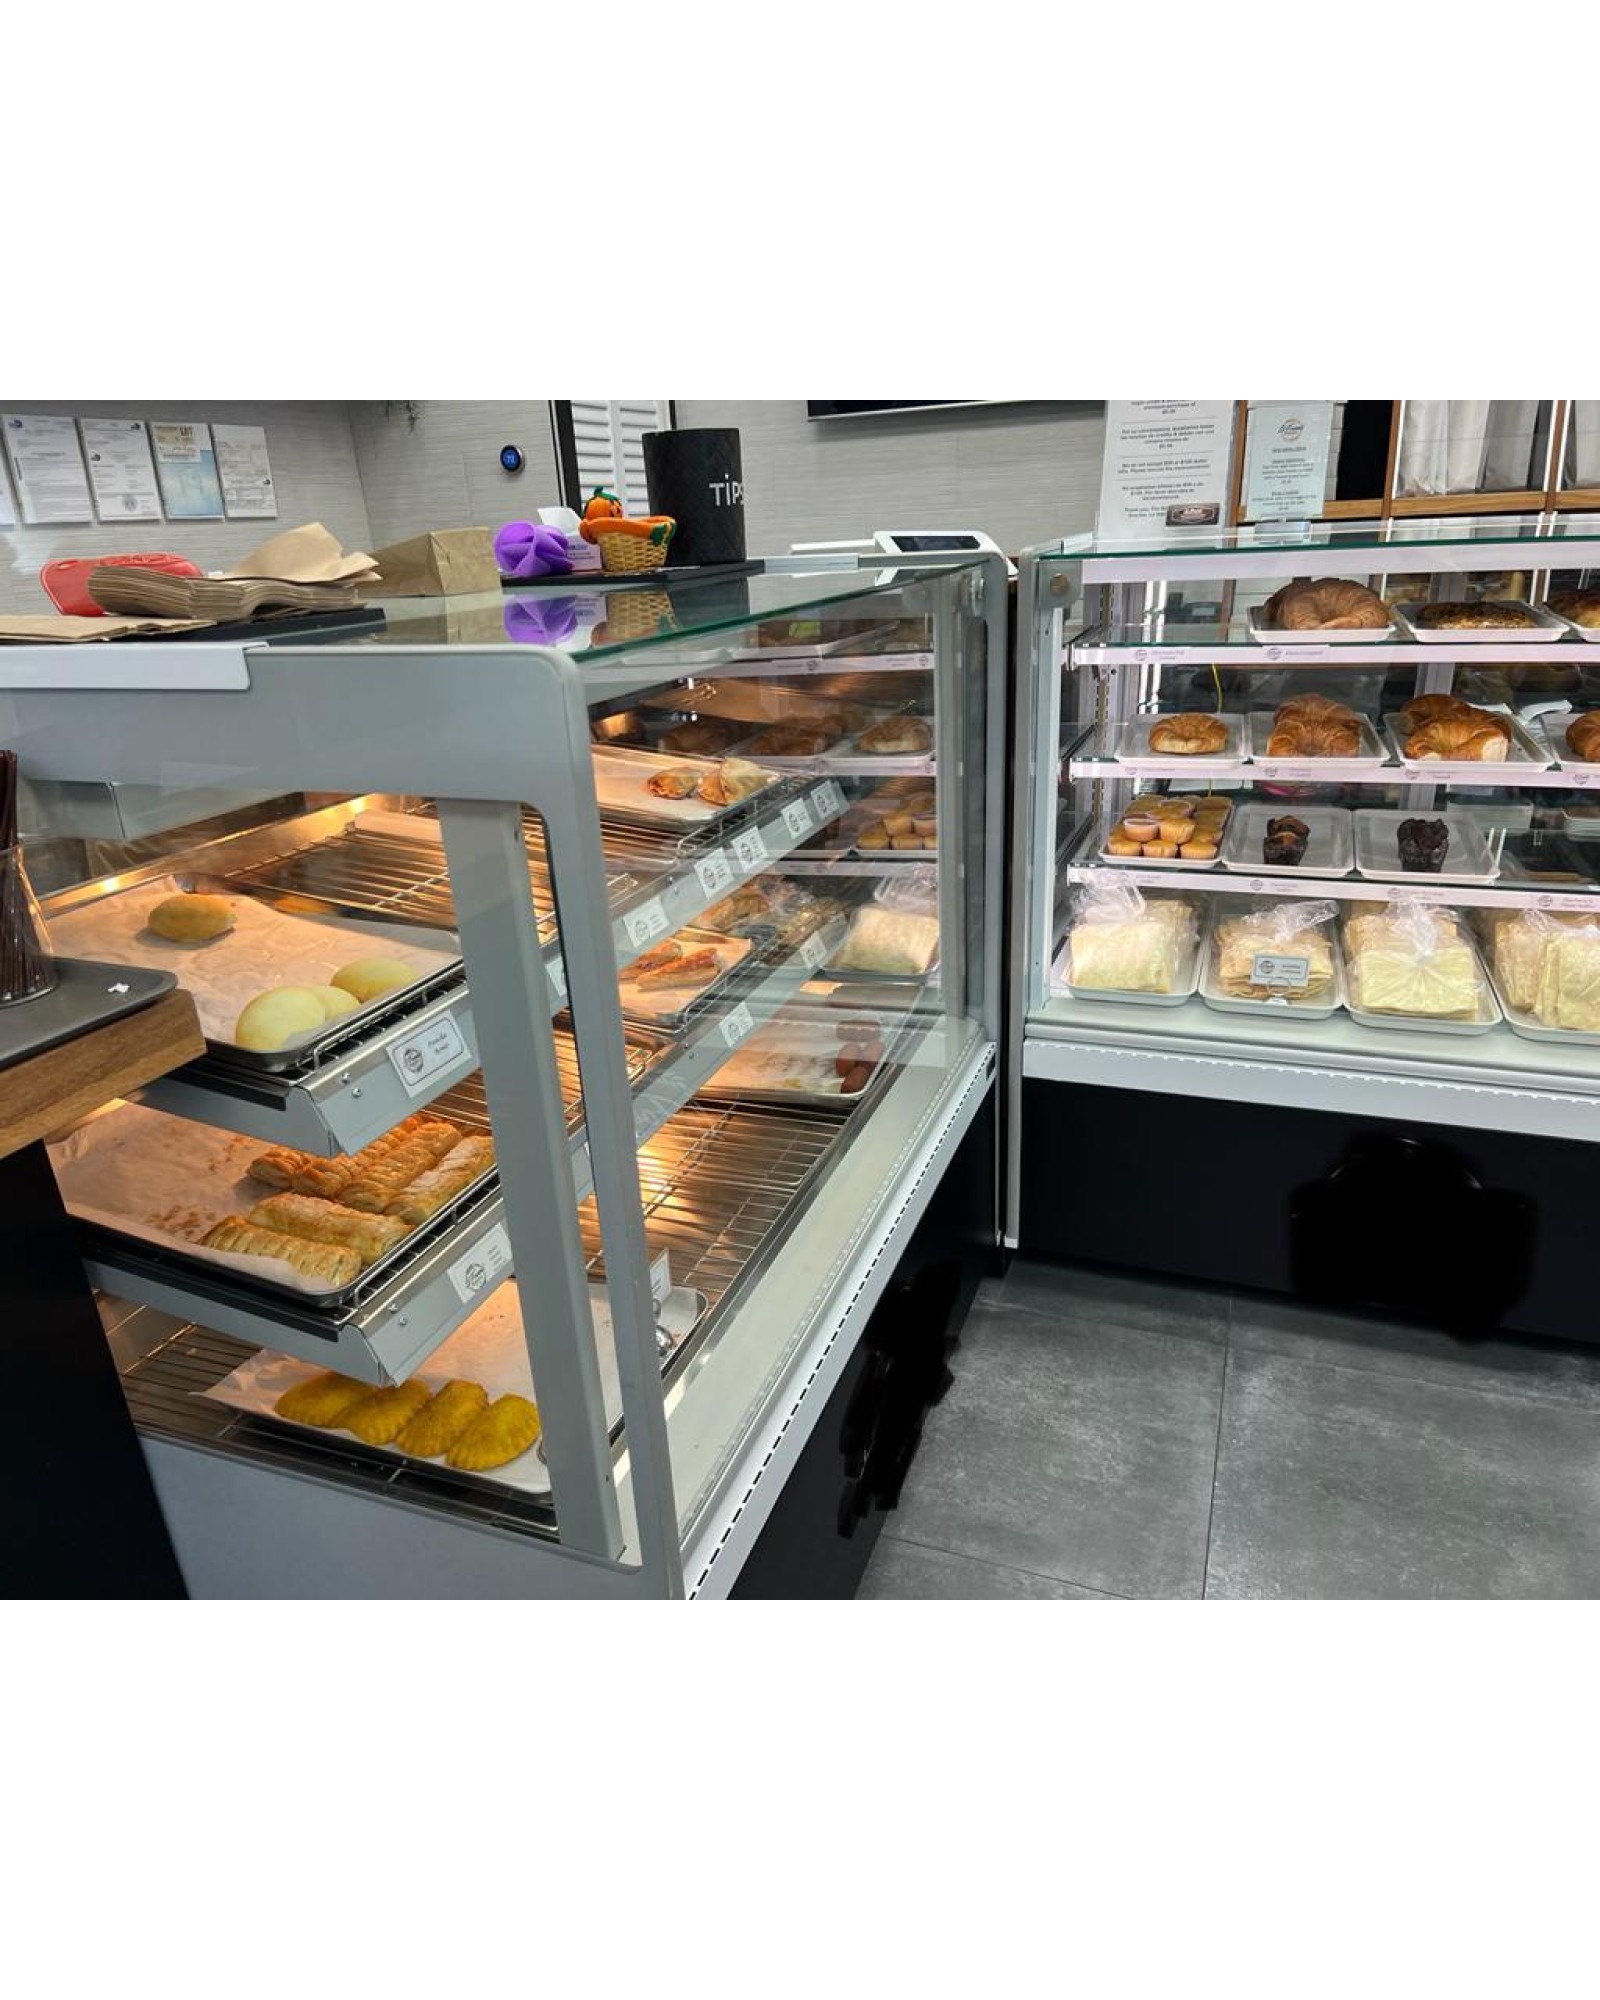 Bakery Case (Non-Refrigerated 51")